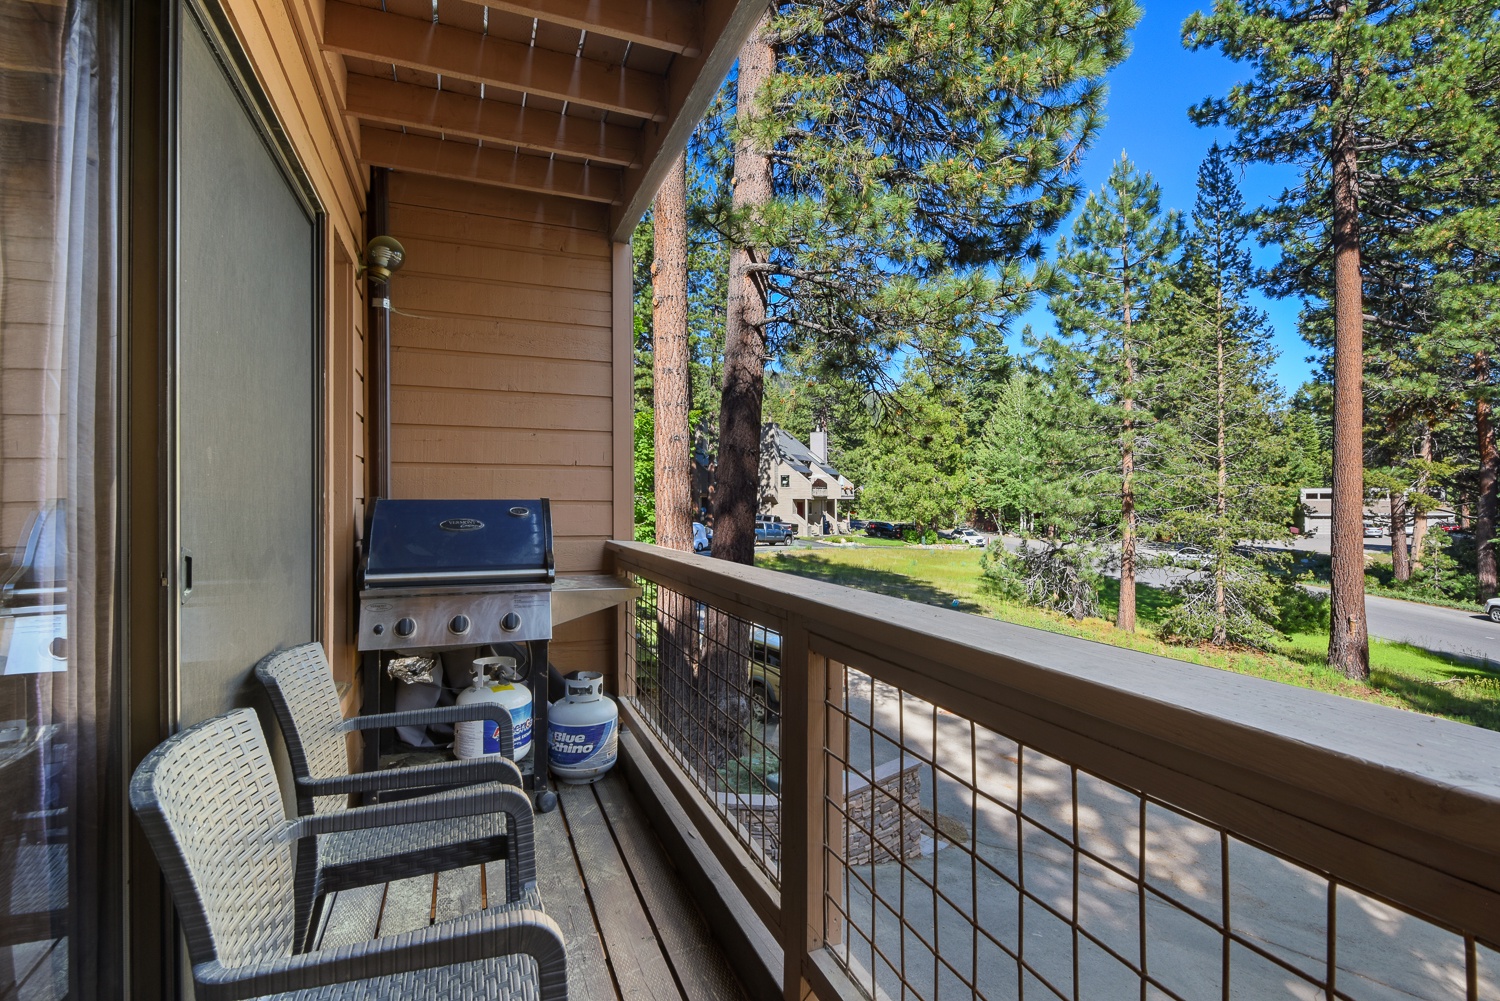 Unit #2: Kick back and relax or grill up a feast on the 2nd level deck